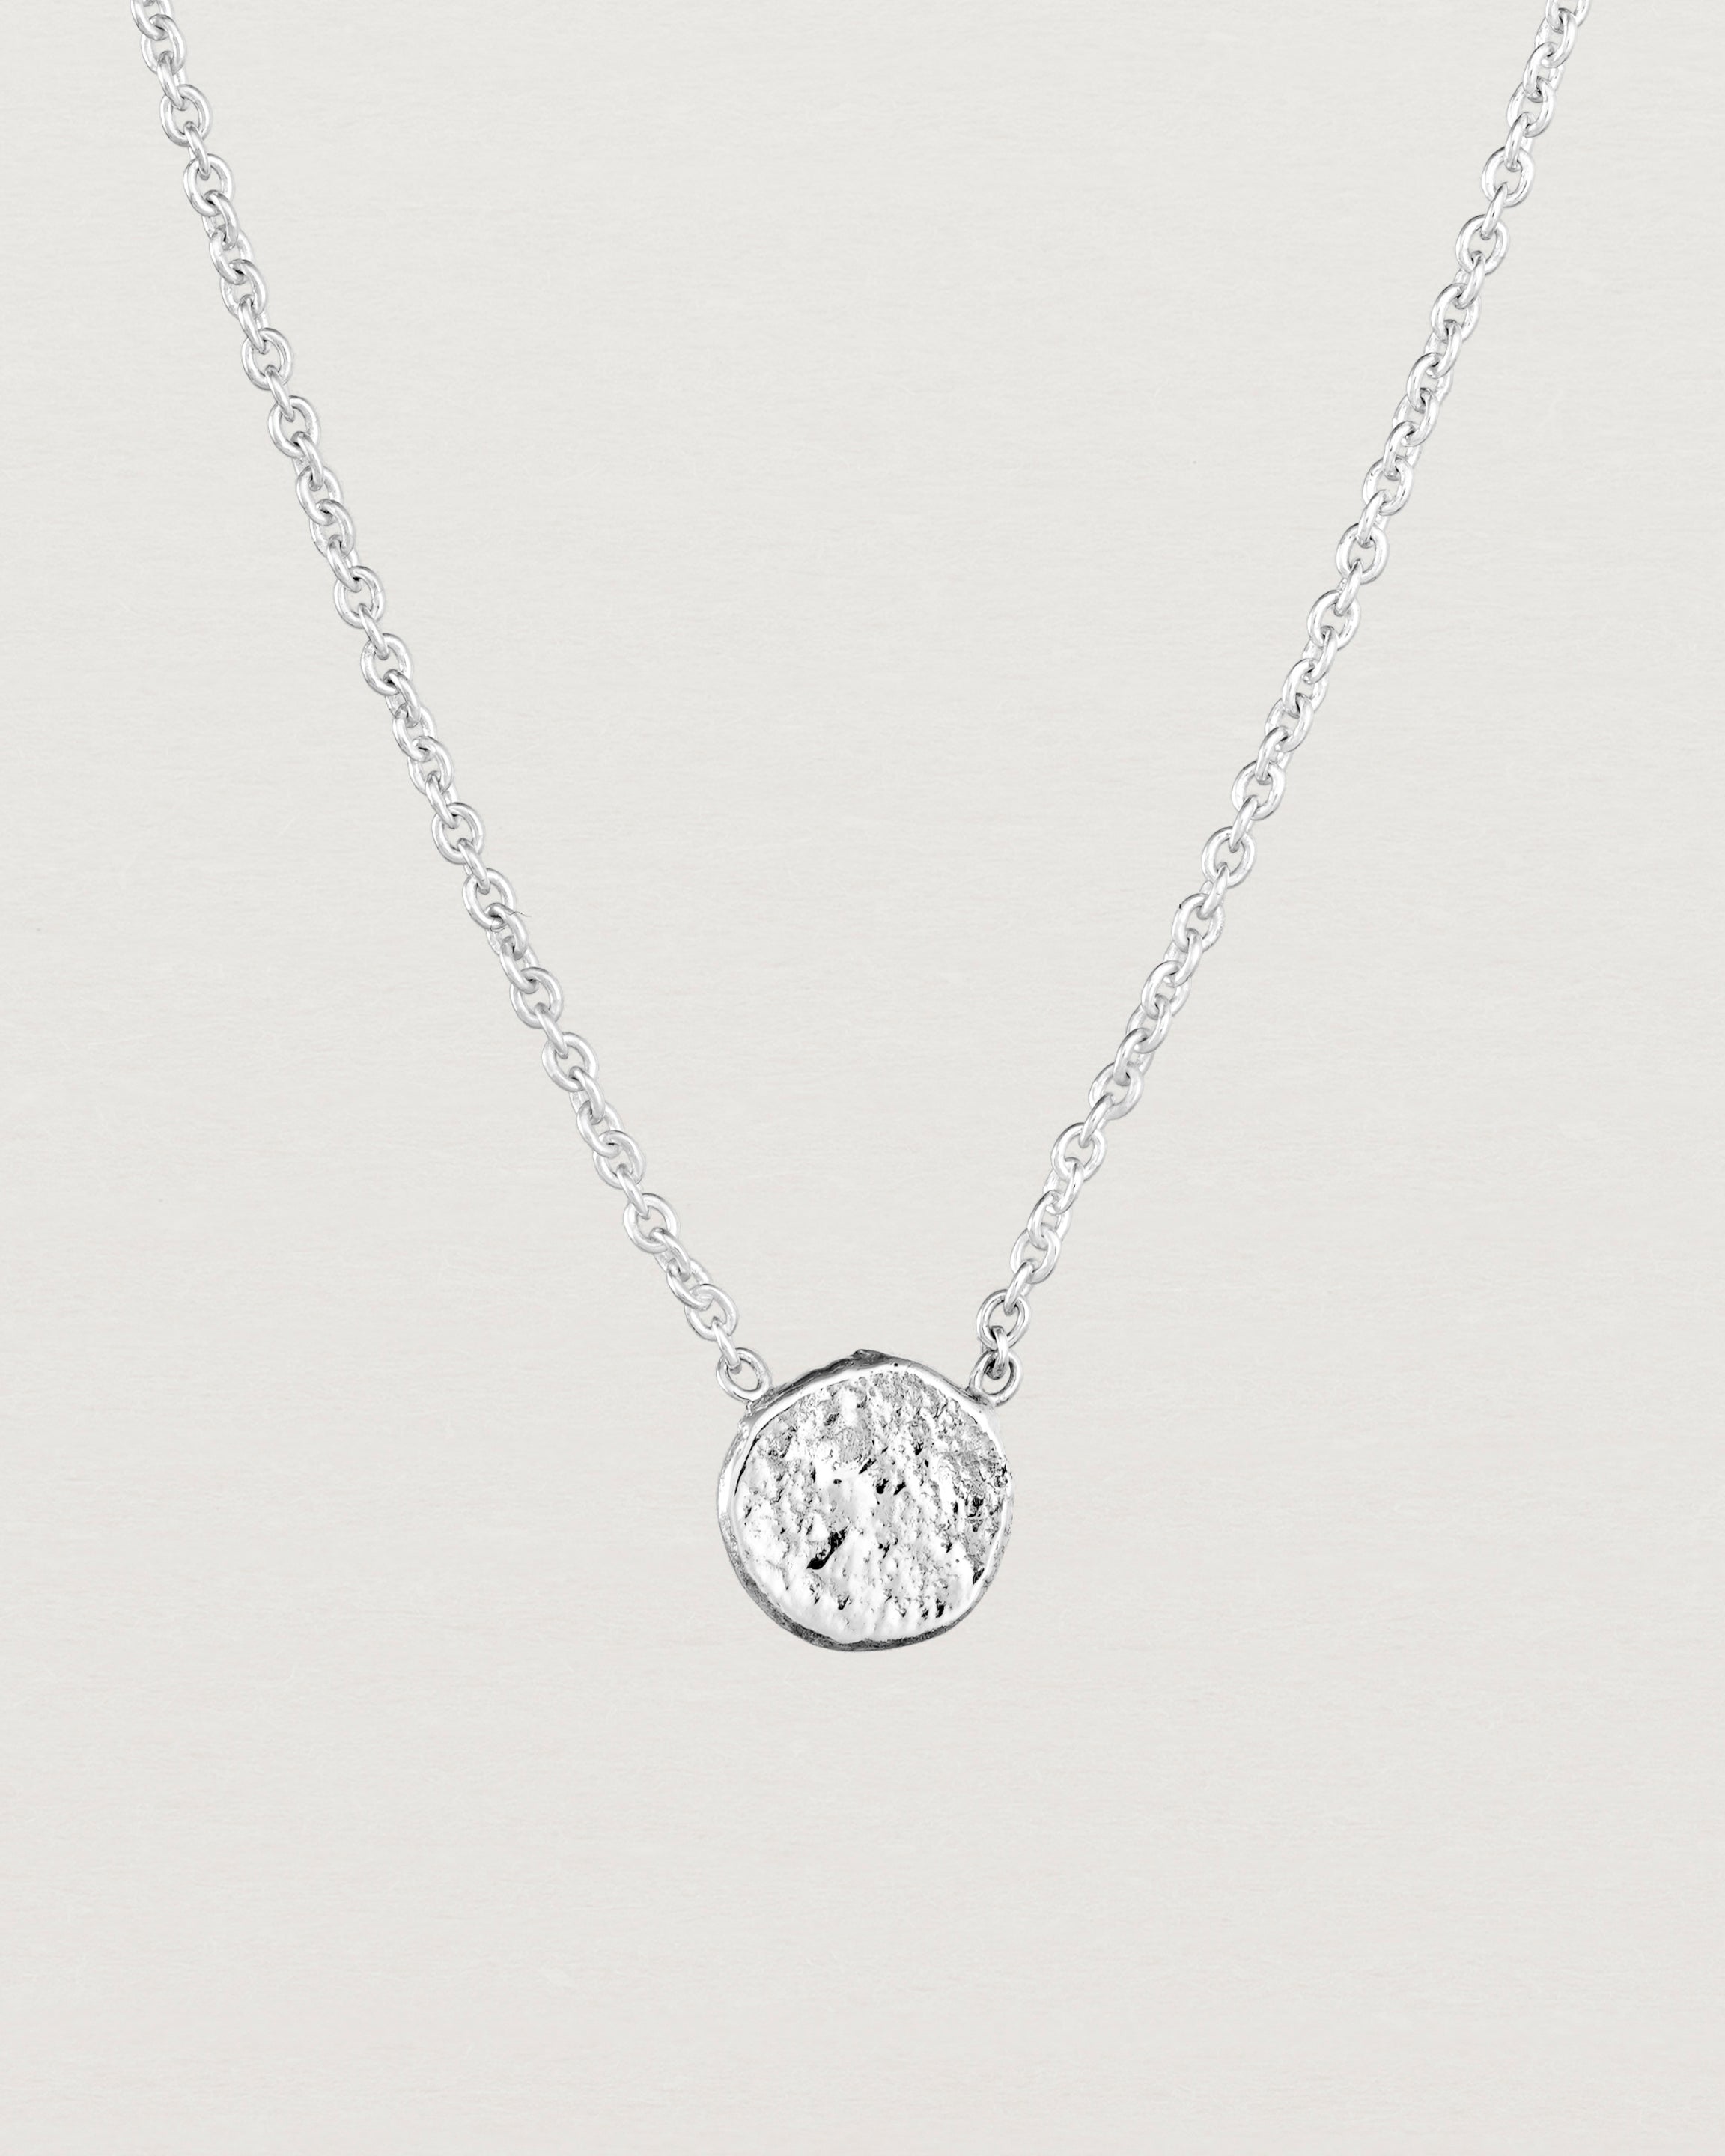 Close up view of the Moon Necklace in sterling silver.